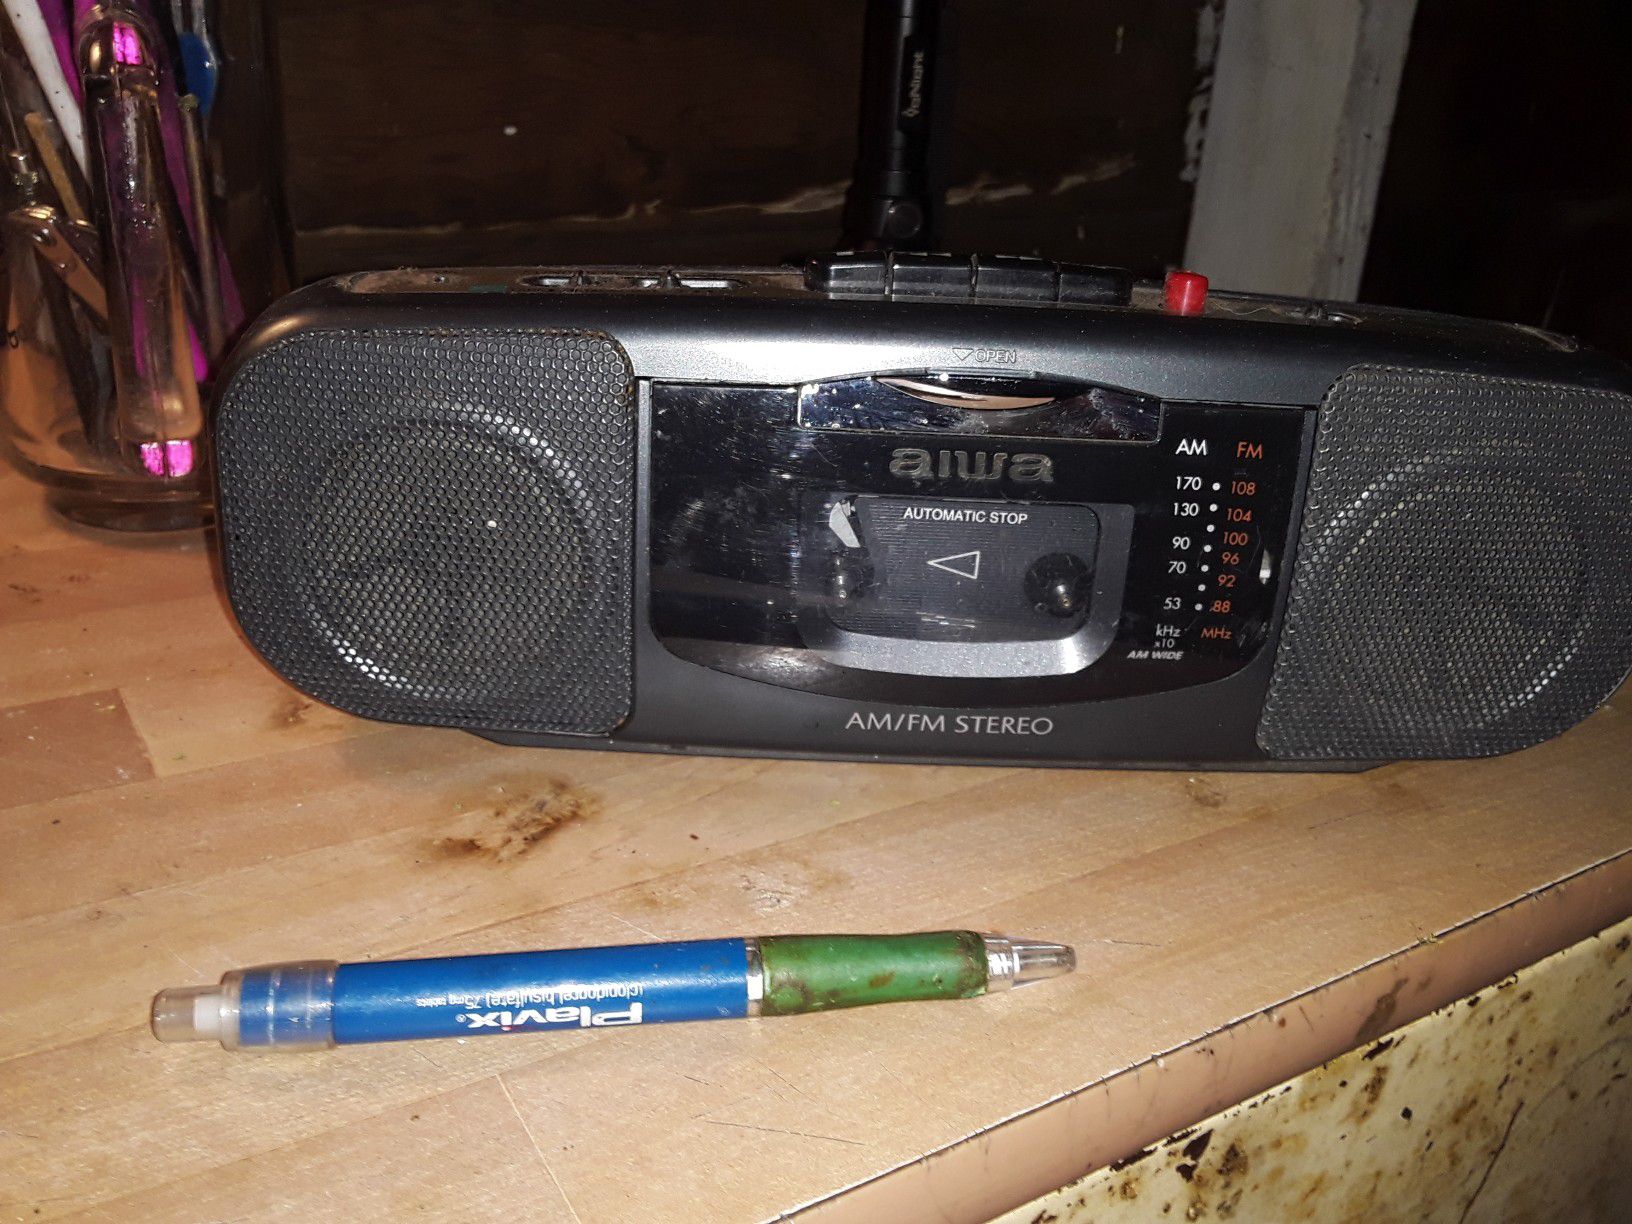 Compact cassette player, works, classic